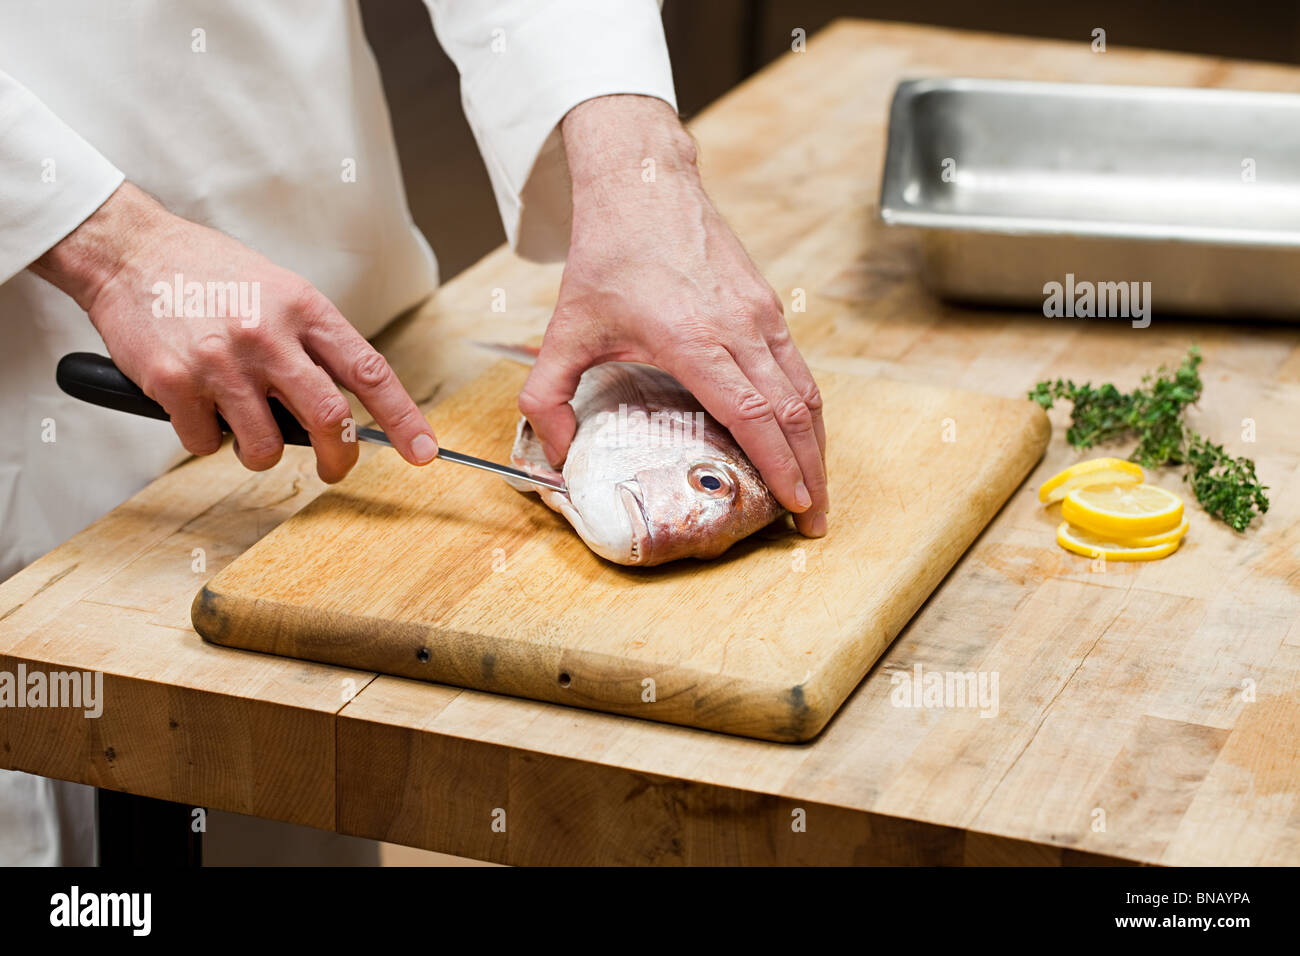 Male chef preparing fish in commercial kitchen Stock Photo